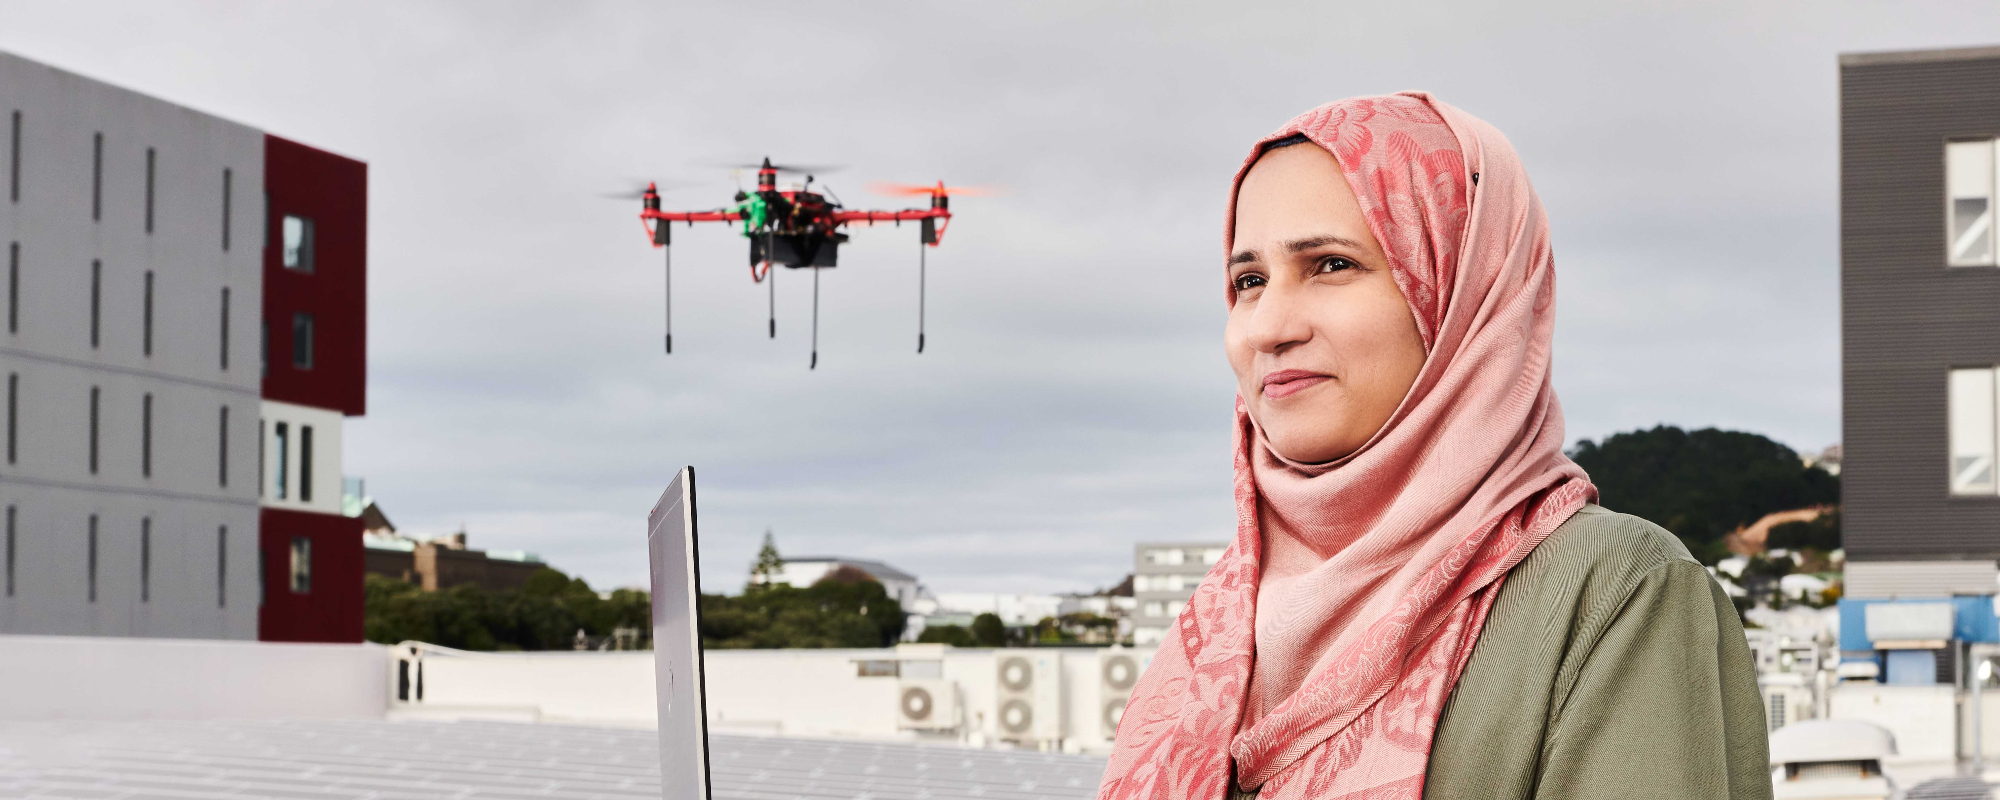 Master of Engineering graduate Rooman Khalid standing on Te Aro campus roof with a solar panel grid and a drone behind her, holding her laptop.